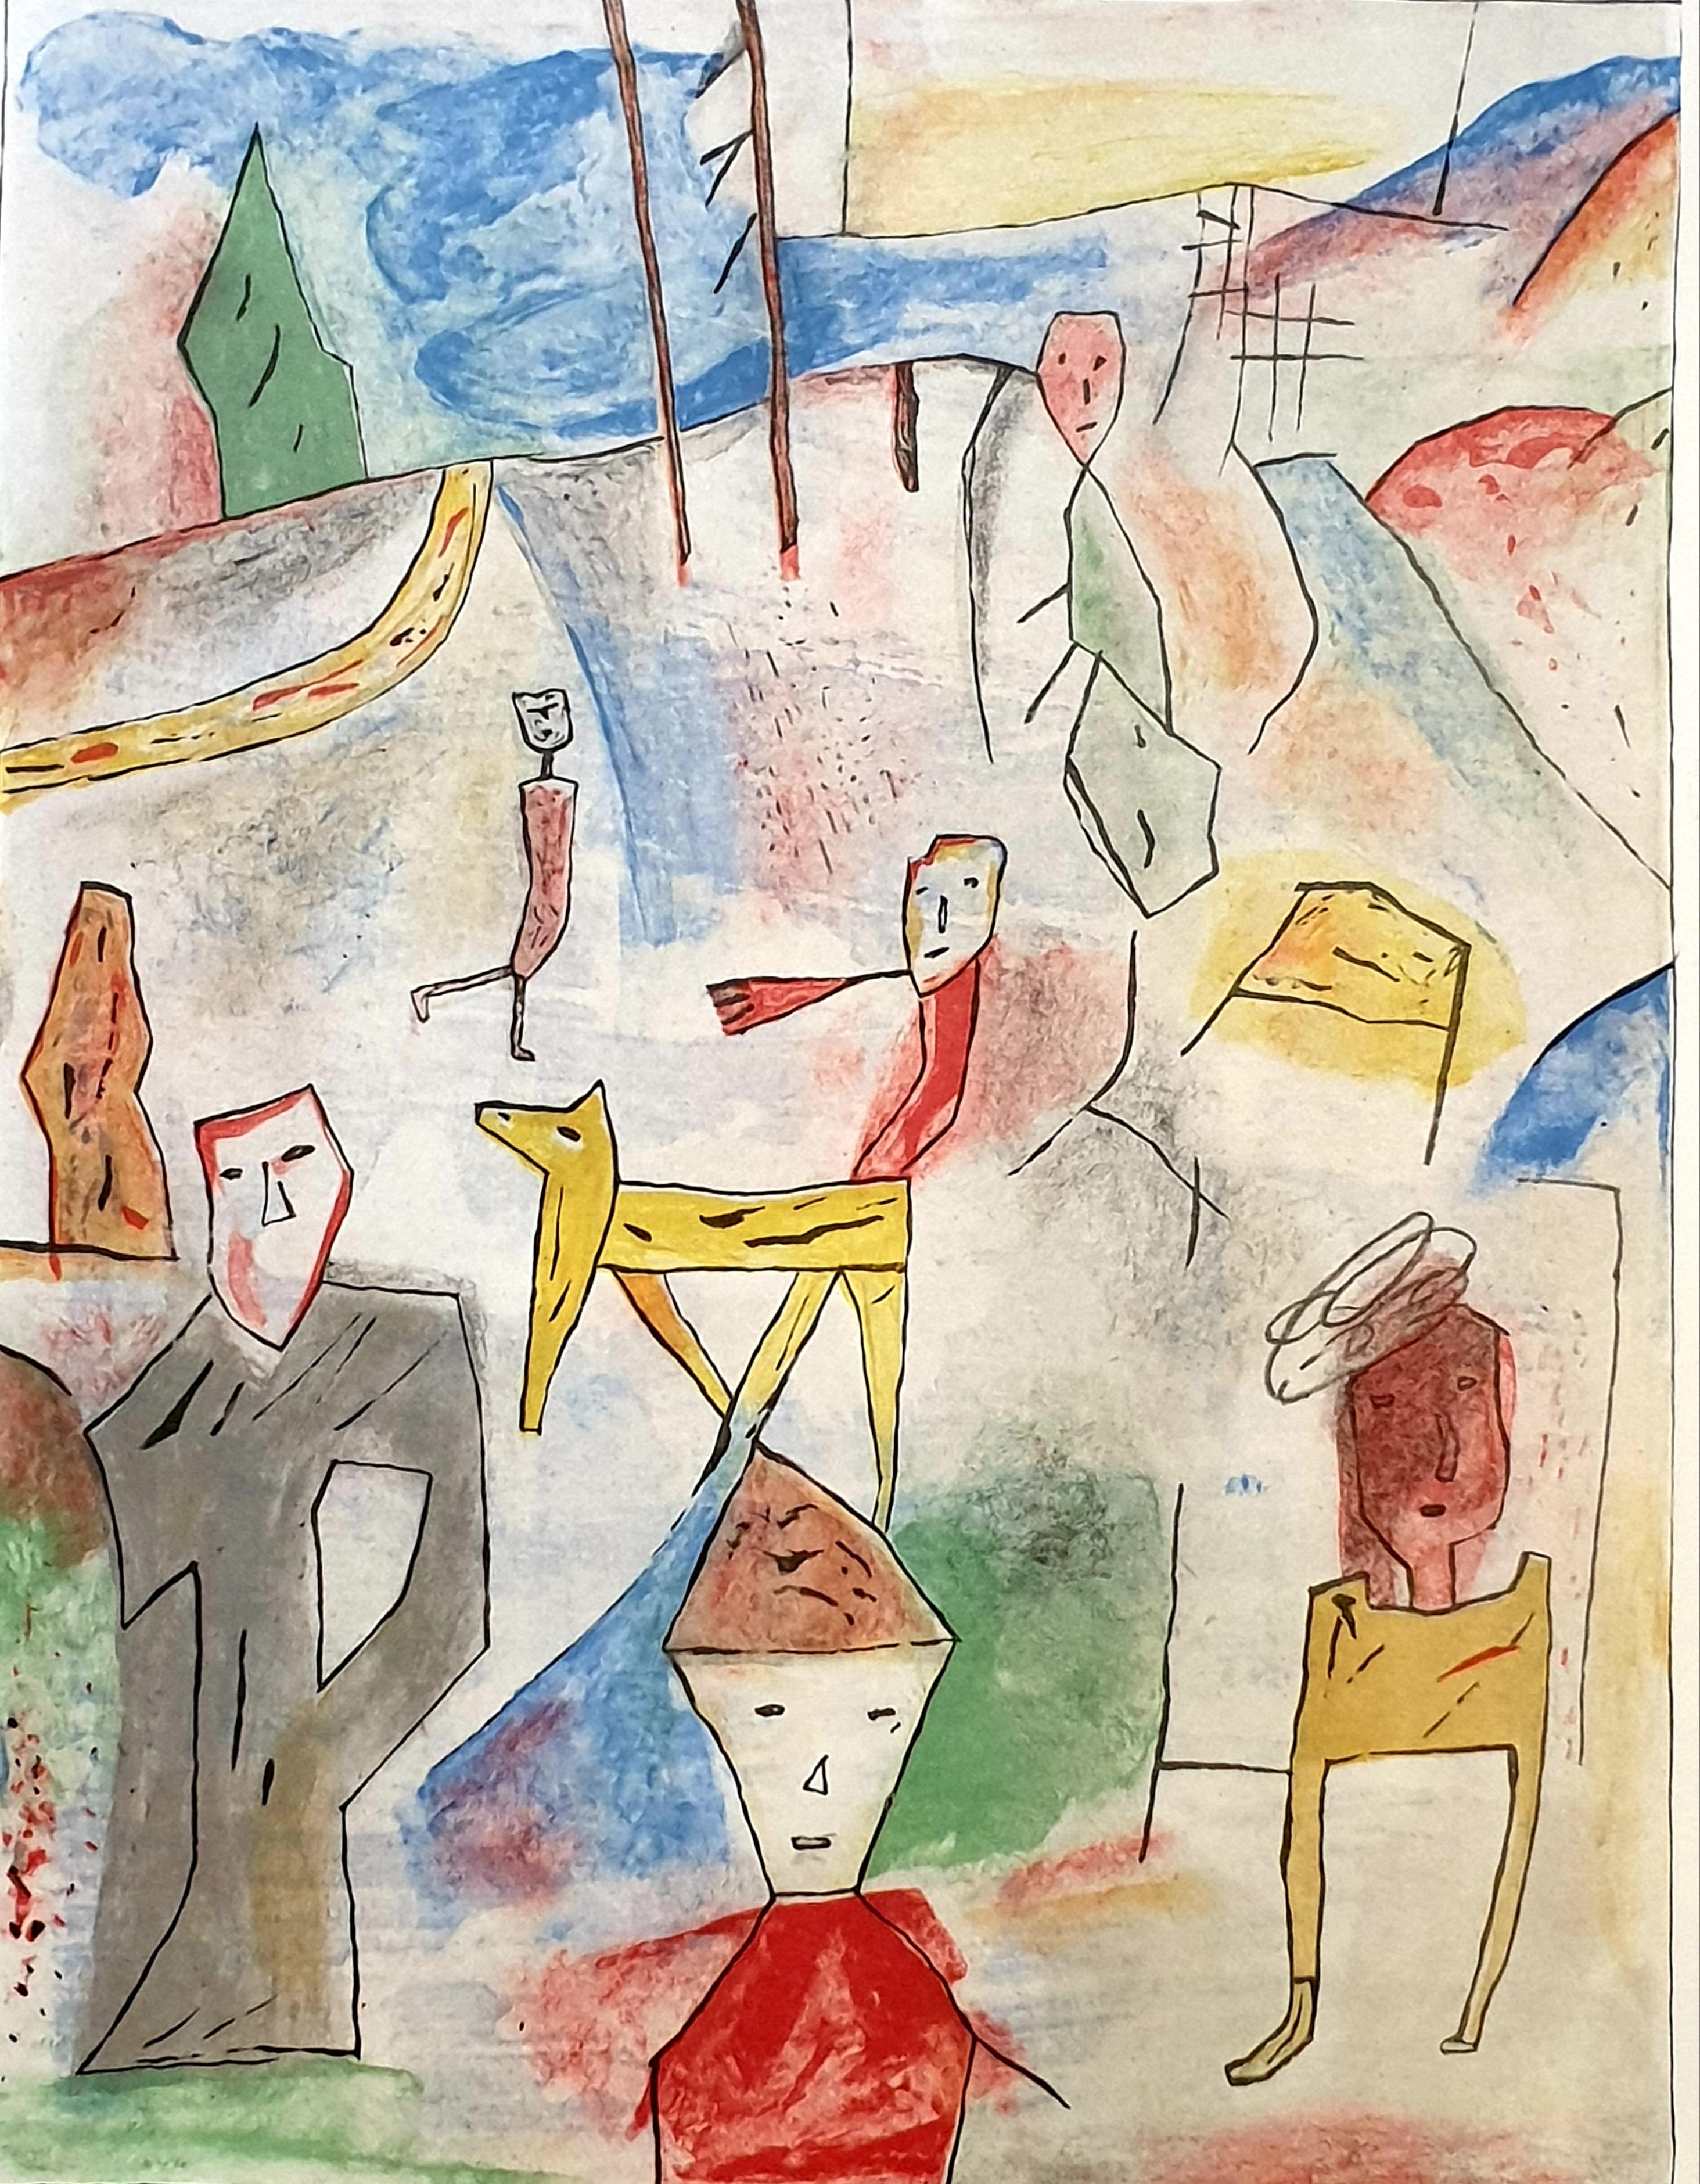 Abstract Expressionist lithograph on BFK Rives paper of a late 20th century work by French artist Eliane Larus.

A lively and highly colourful lithograph of a bustling scene of a day out in the country. The images are flattened and lack perspective,